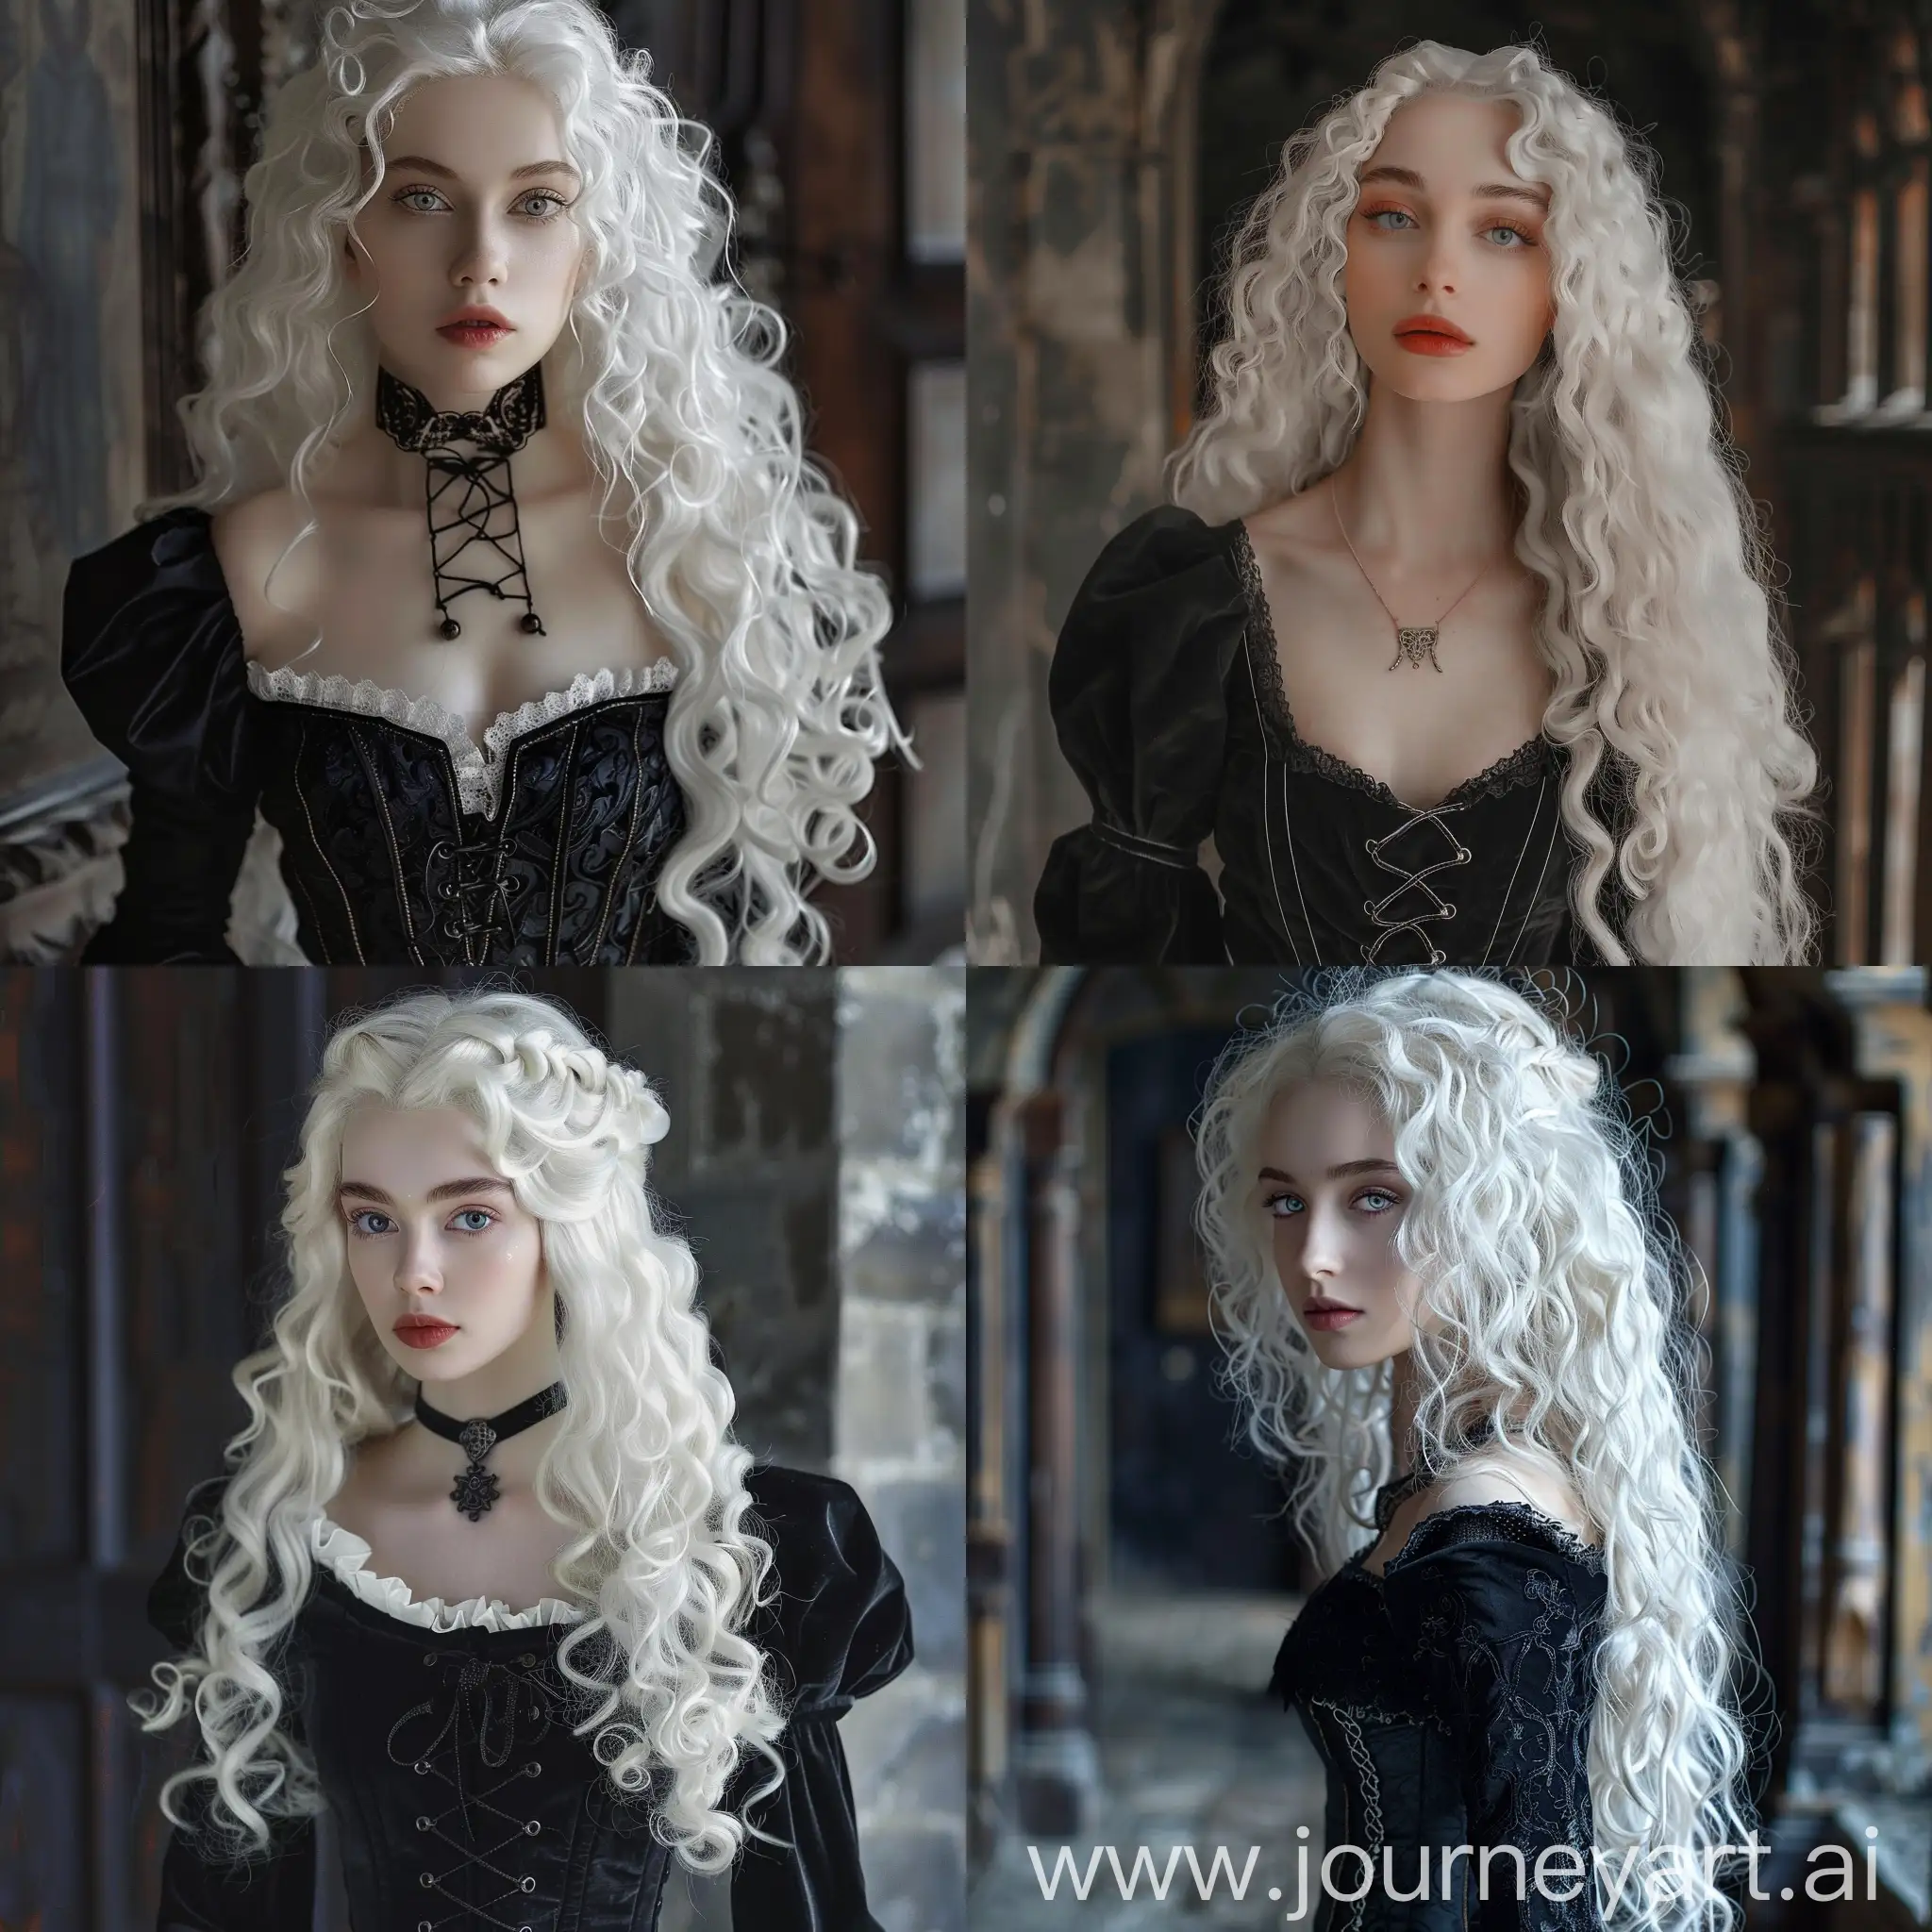 Girl: 20 years old: broad shoulders and hips: ample breasts: fair skin: long curly white hair: white eyelashes: black eye color: black medieval floor-length dress